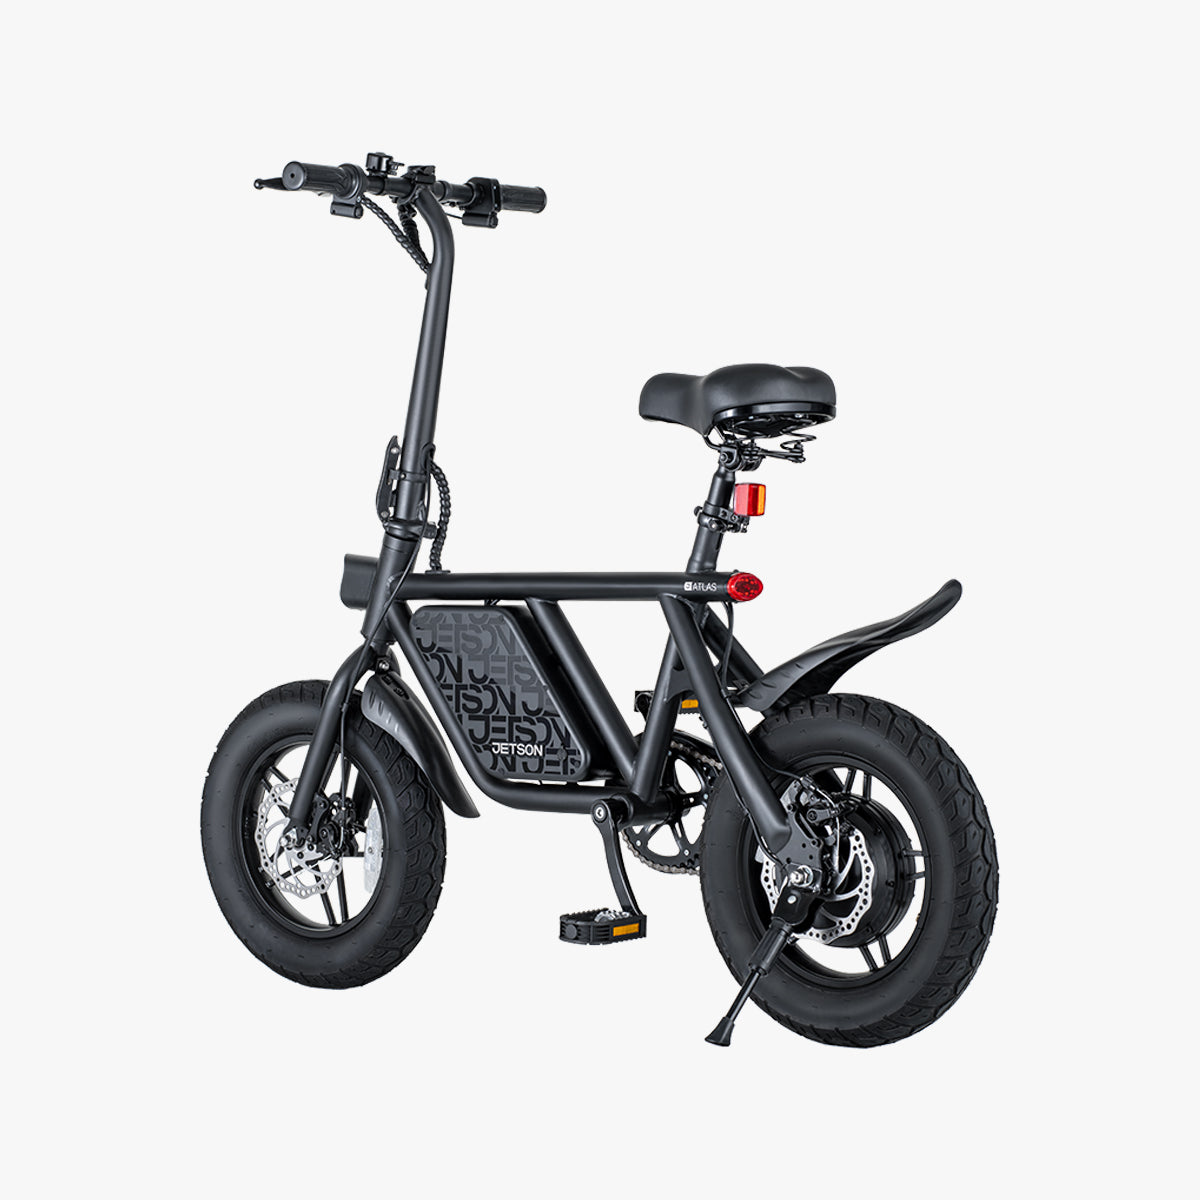 back view of the Atlas e-bike facing to the right with the kickstand down